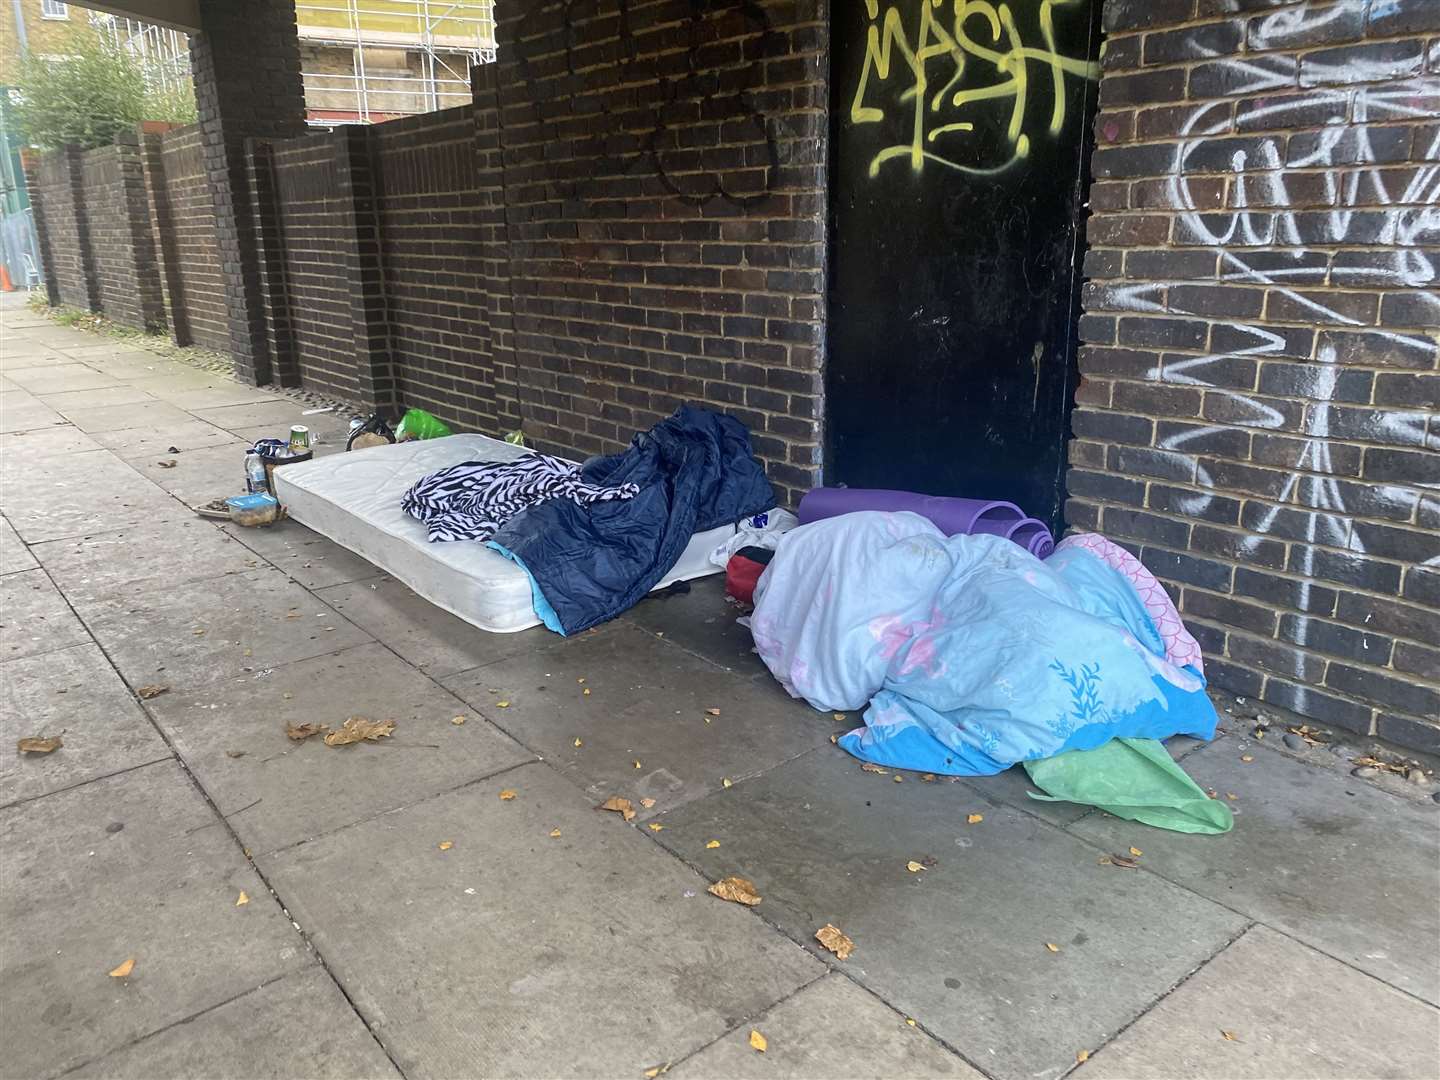 Kent's homeless could face a cold and lonely Christmas